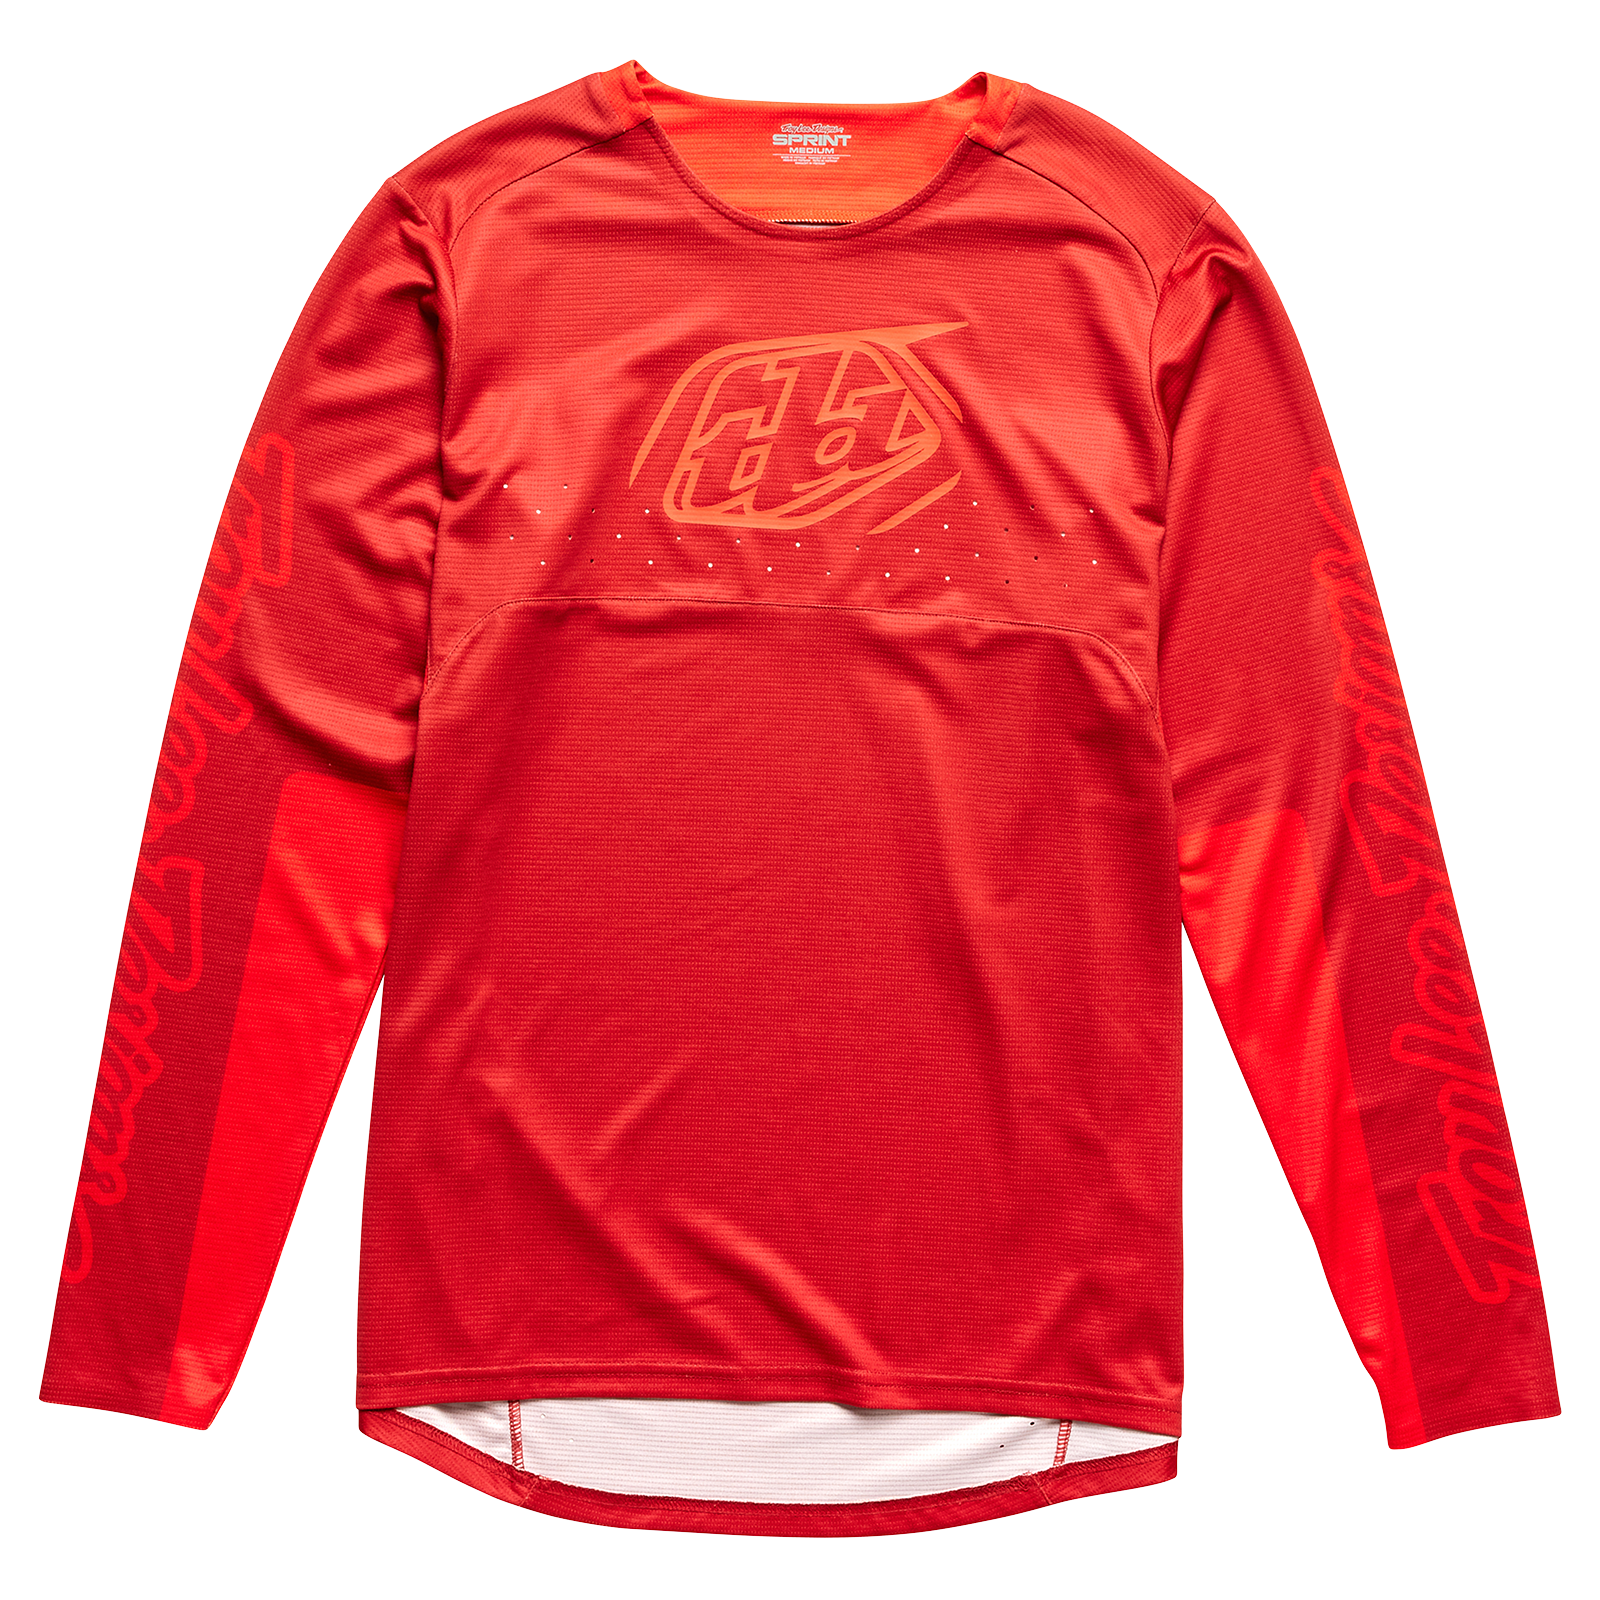 A TLD Sprint Jersey Icon Fire Orange jersey with a black background.